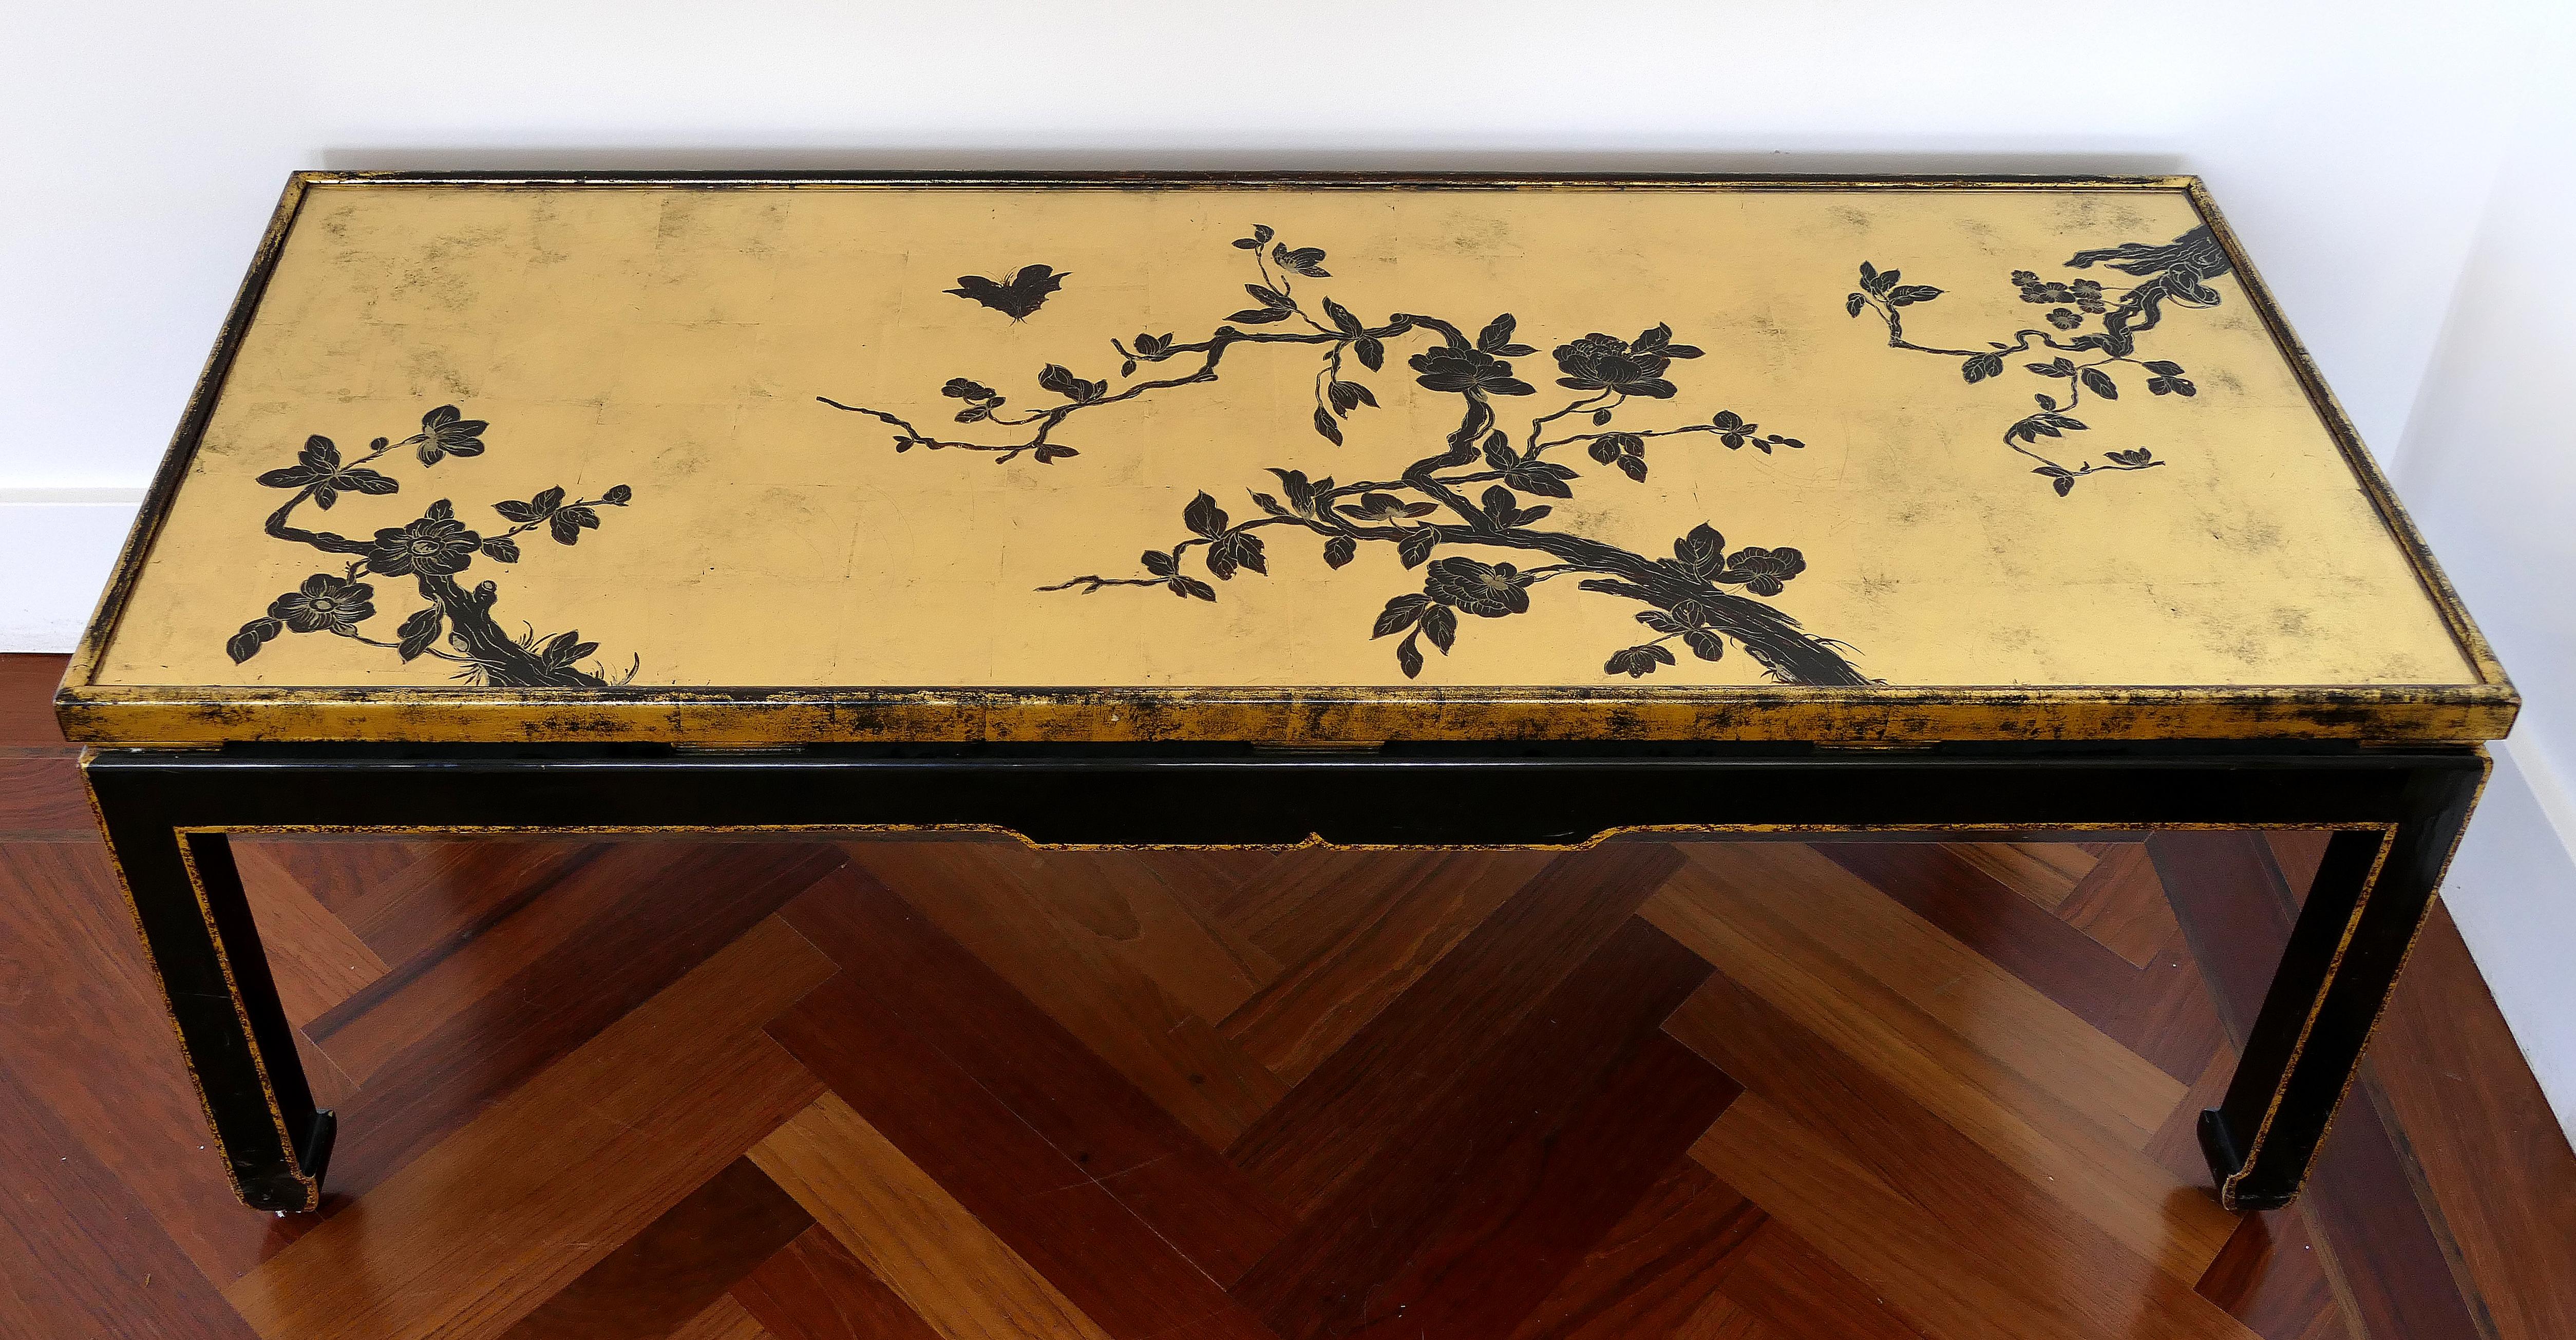 Mid-century Japanese gold leaf cherry blossom coffee table with inset glass

Offered for sale is a mid-century lacquered and gilt-wood coffee table depicting Japanese cherry blossoms. This beautifully crafted table has an inset glass that protects